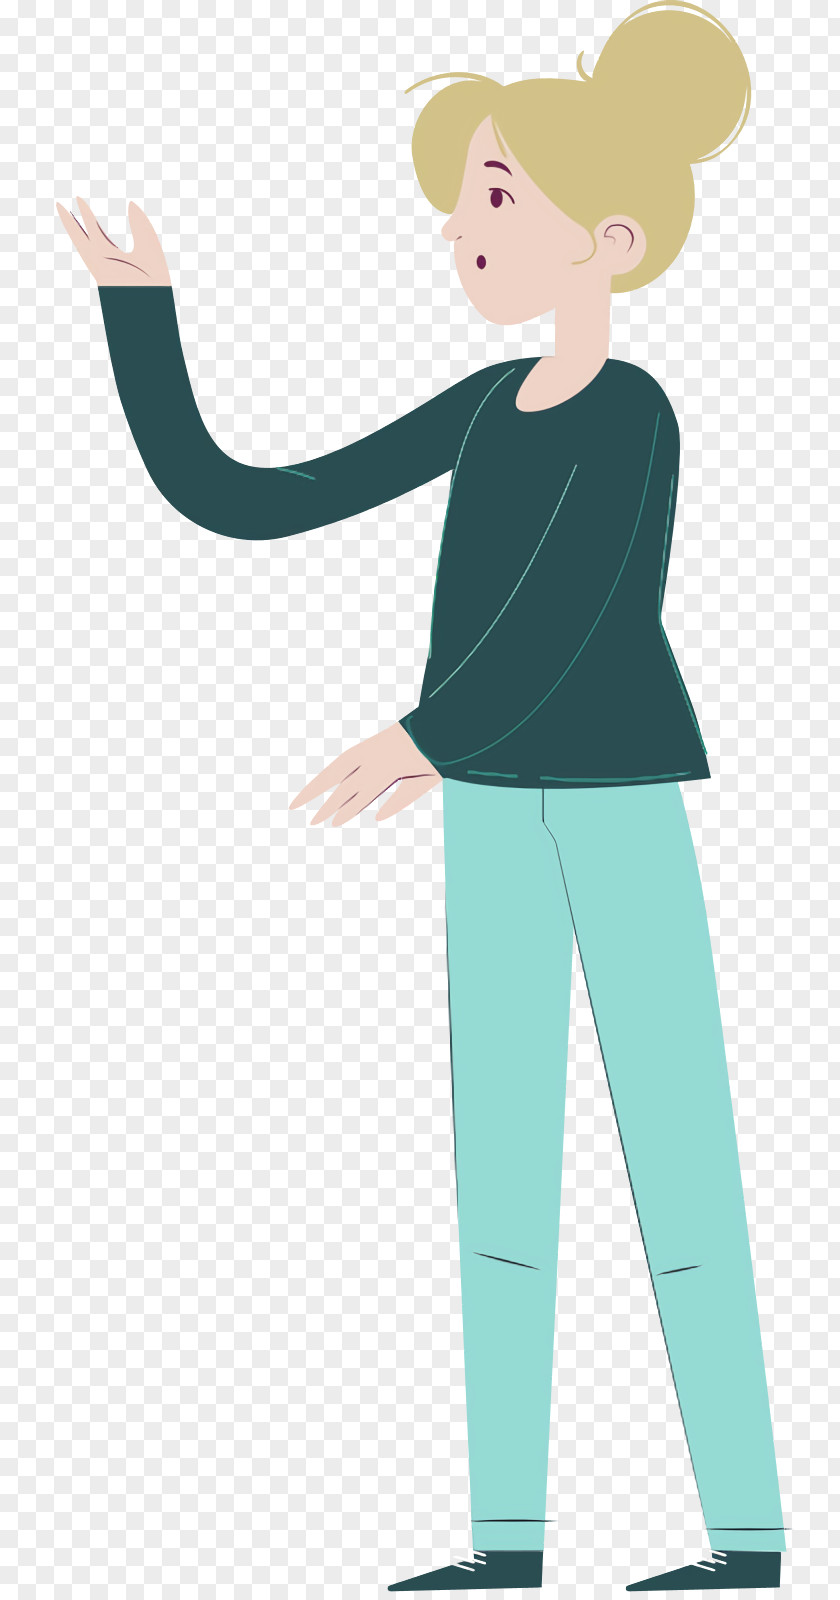 Clothing Cartoon Teal Male Happiness PNG